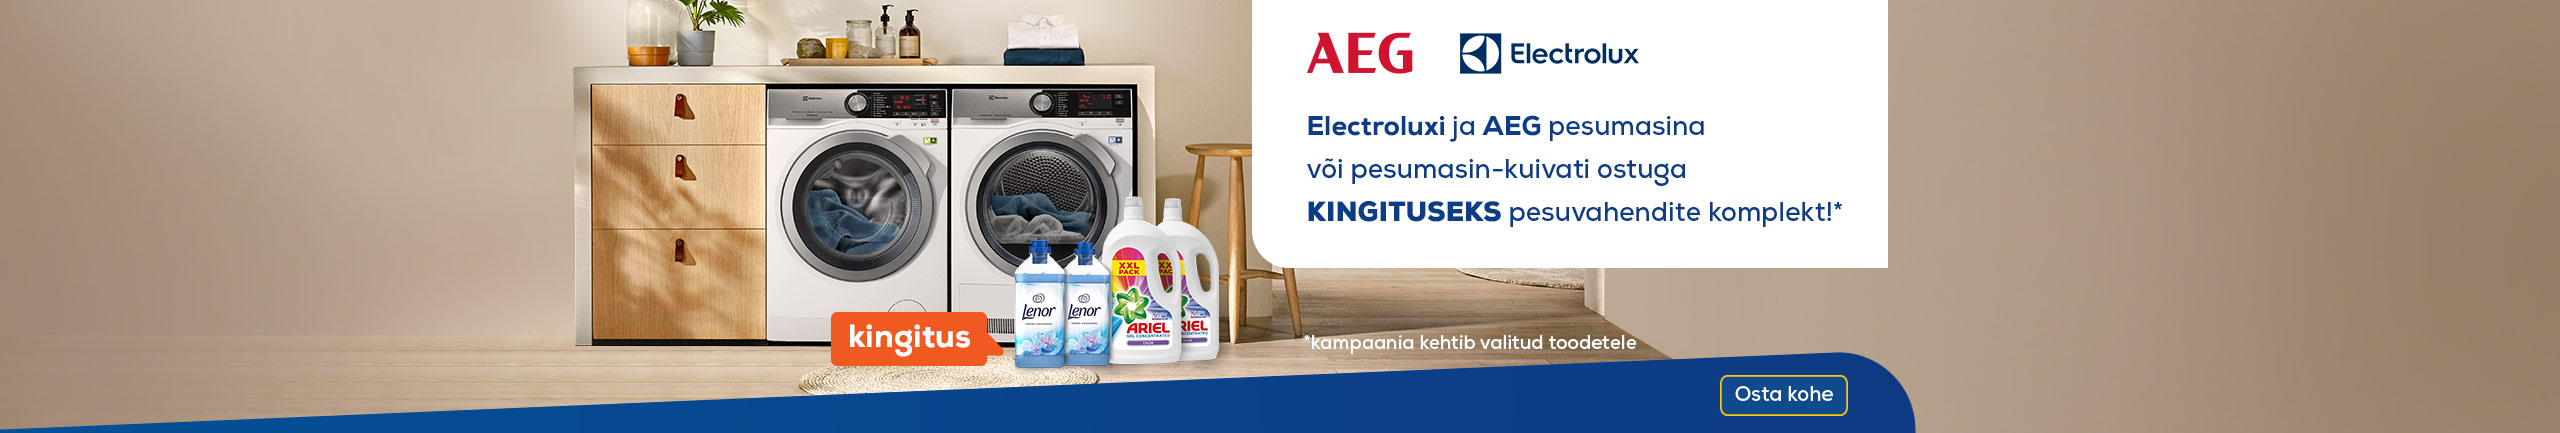 Buy Electrolux or AEG washer and receive a complimentary gift!